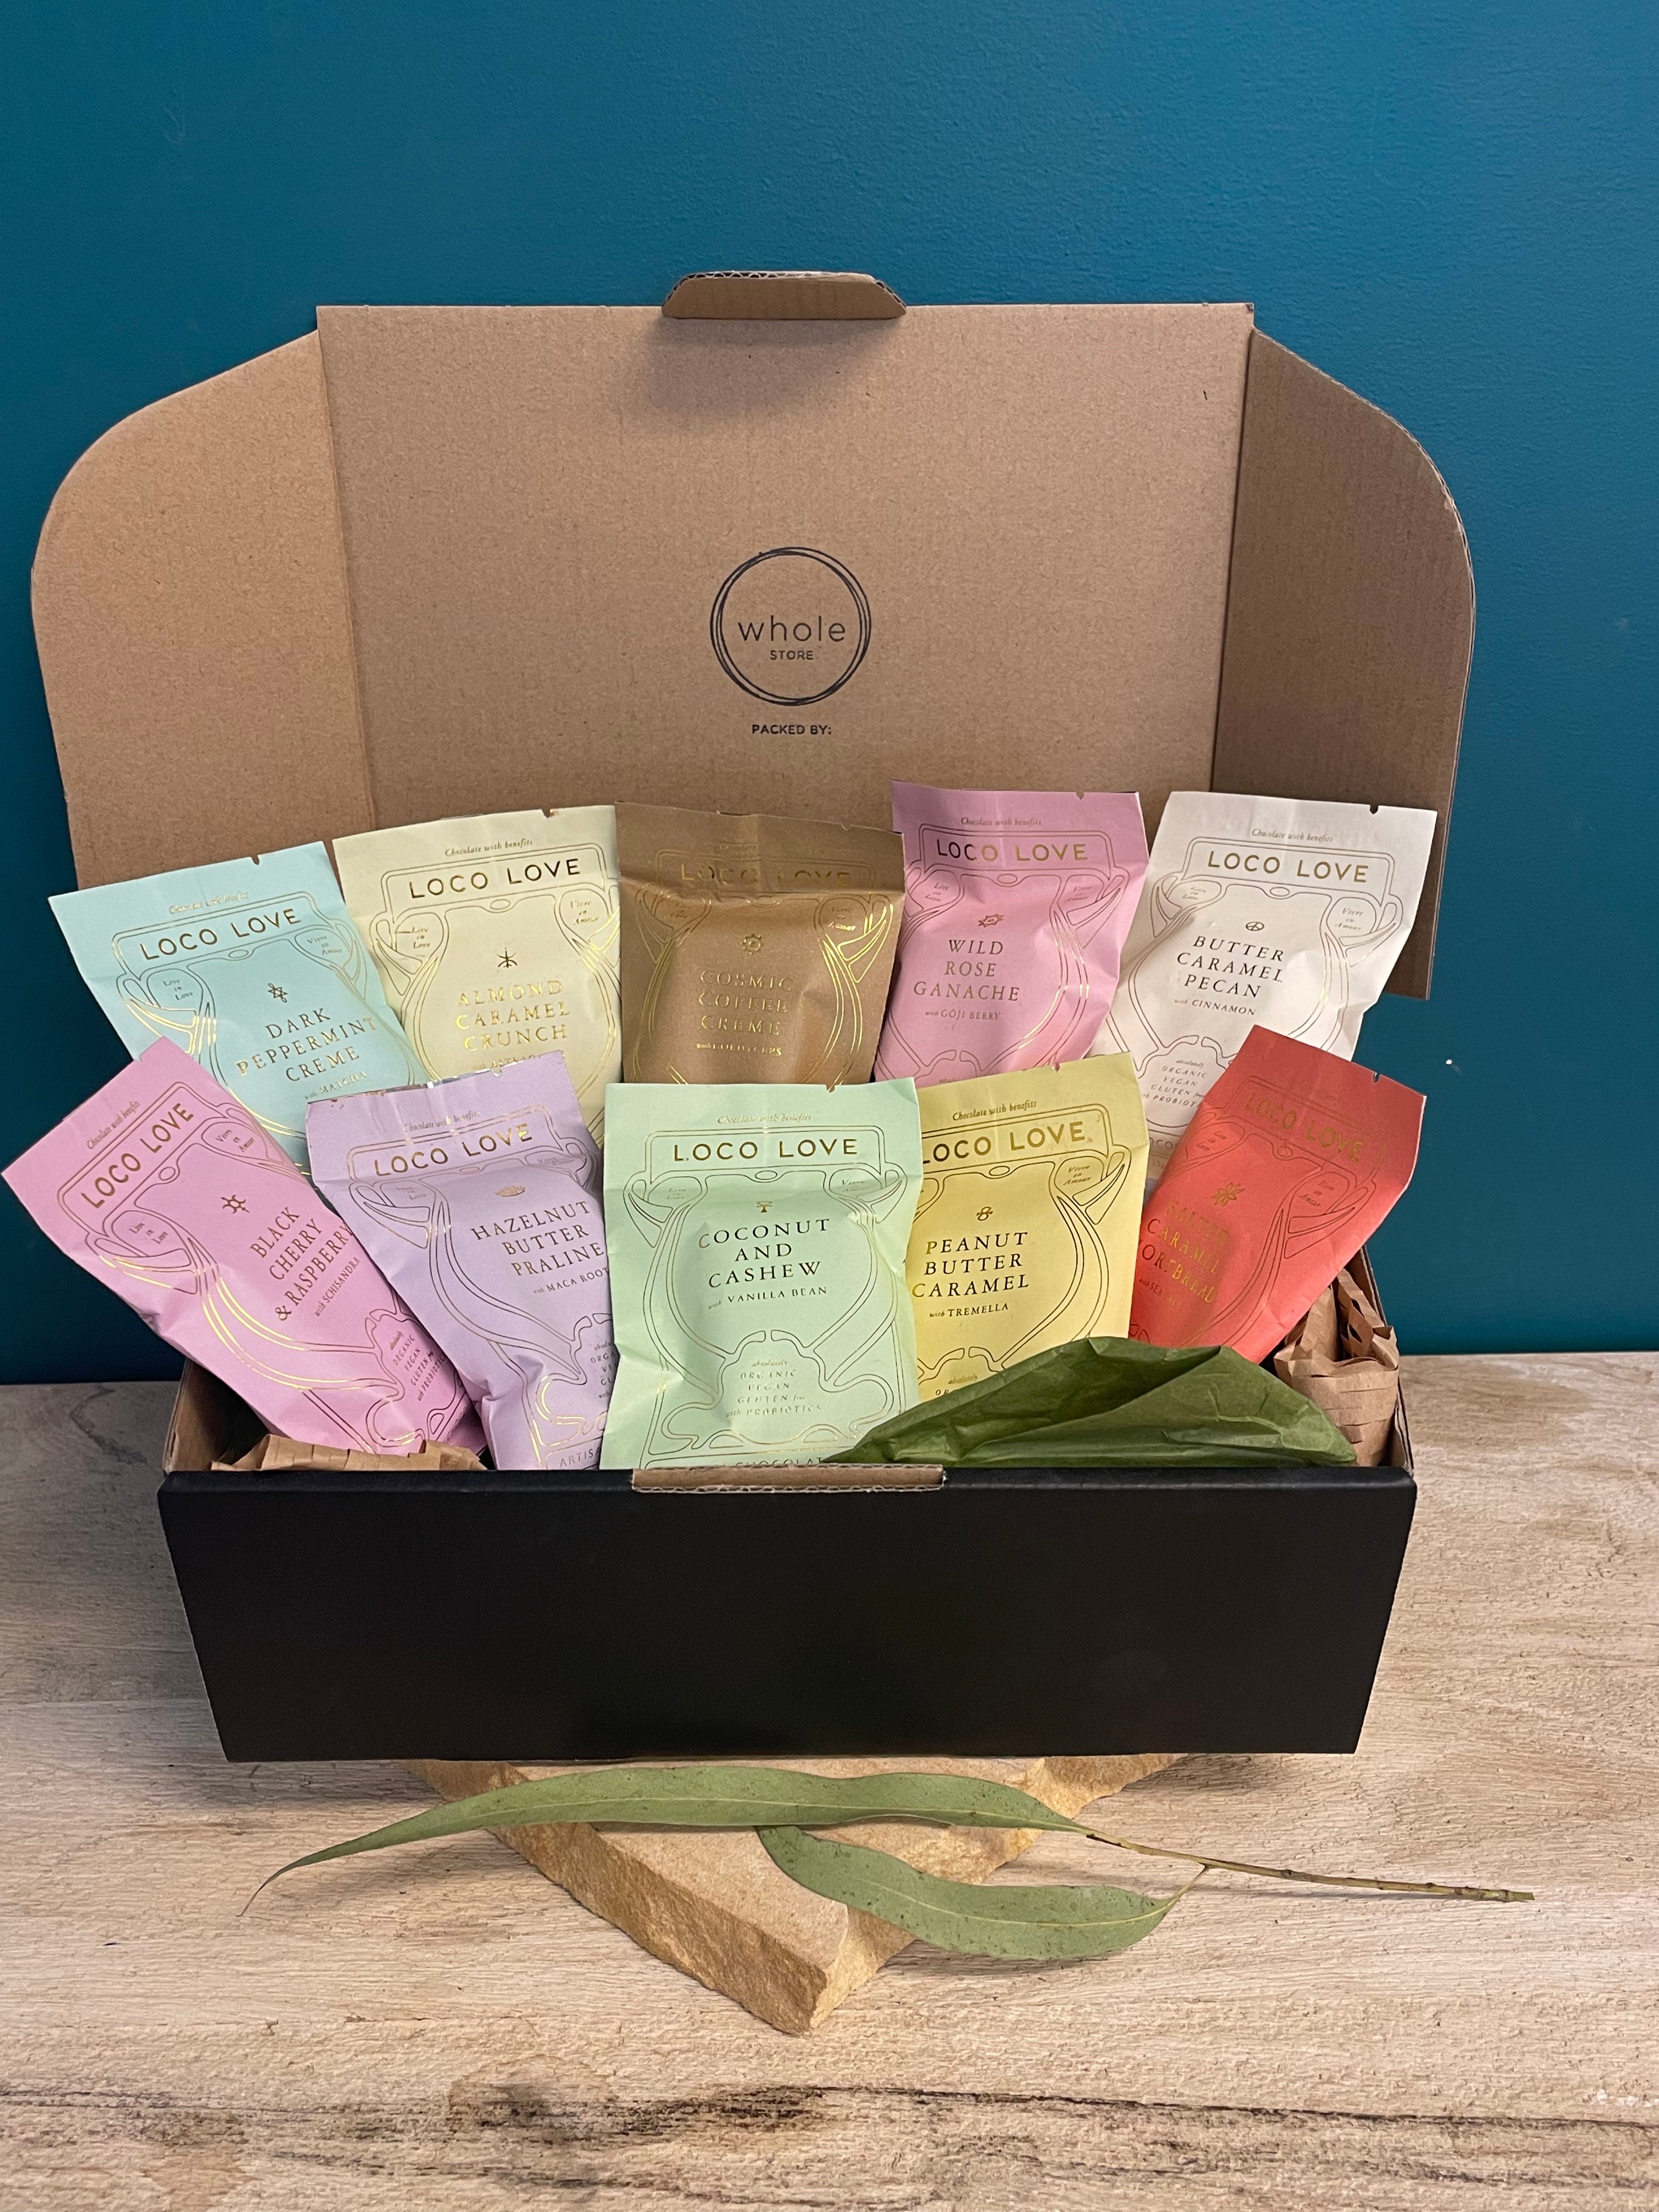 Loco Love - Our Favourite Singles - Gift Box by WholeStore